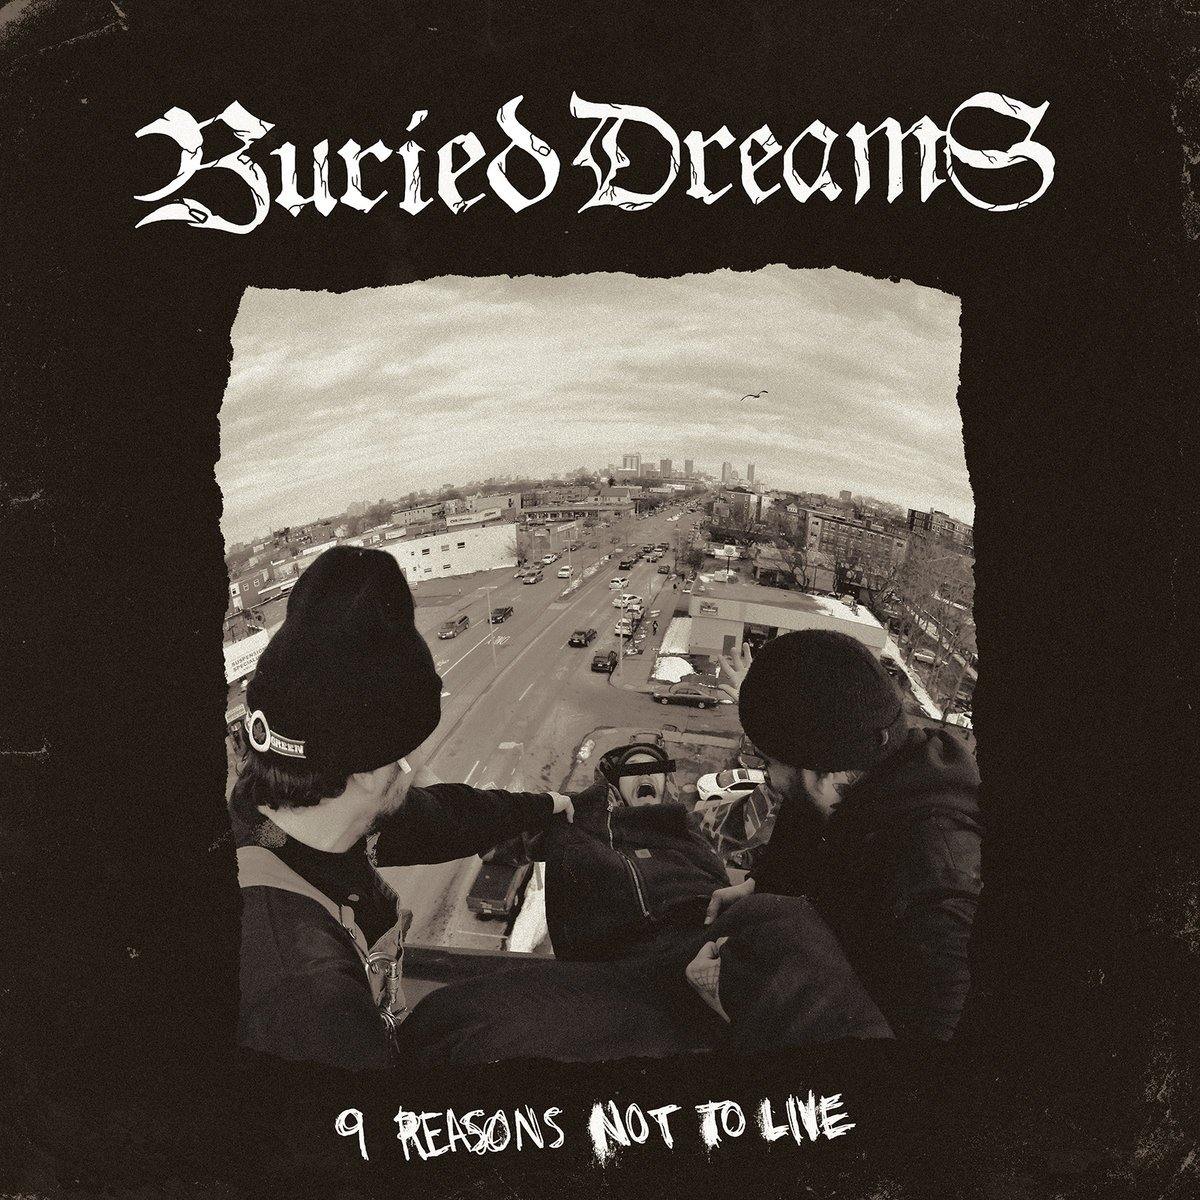 Buy – Buried Dreams "9 Reasons Not To Live" 12" – Band & Music Merch – Cold Cuts Merch